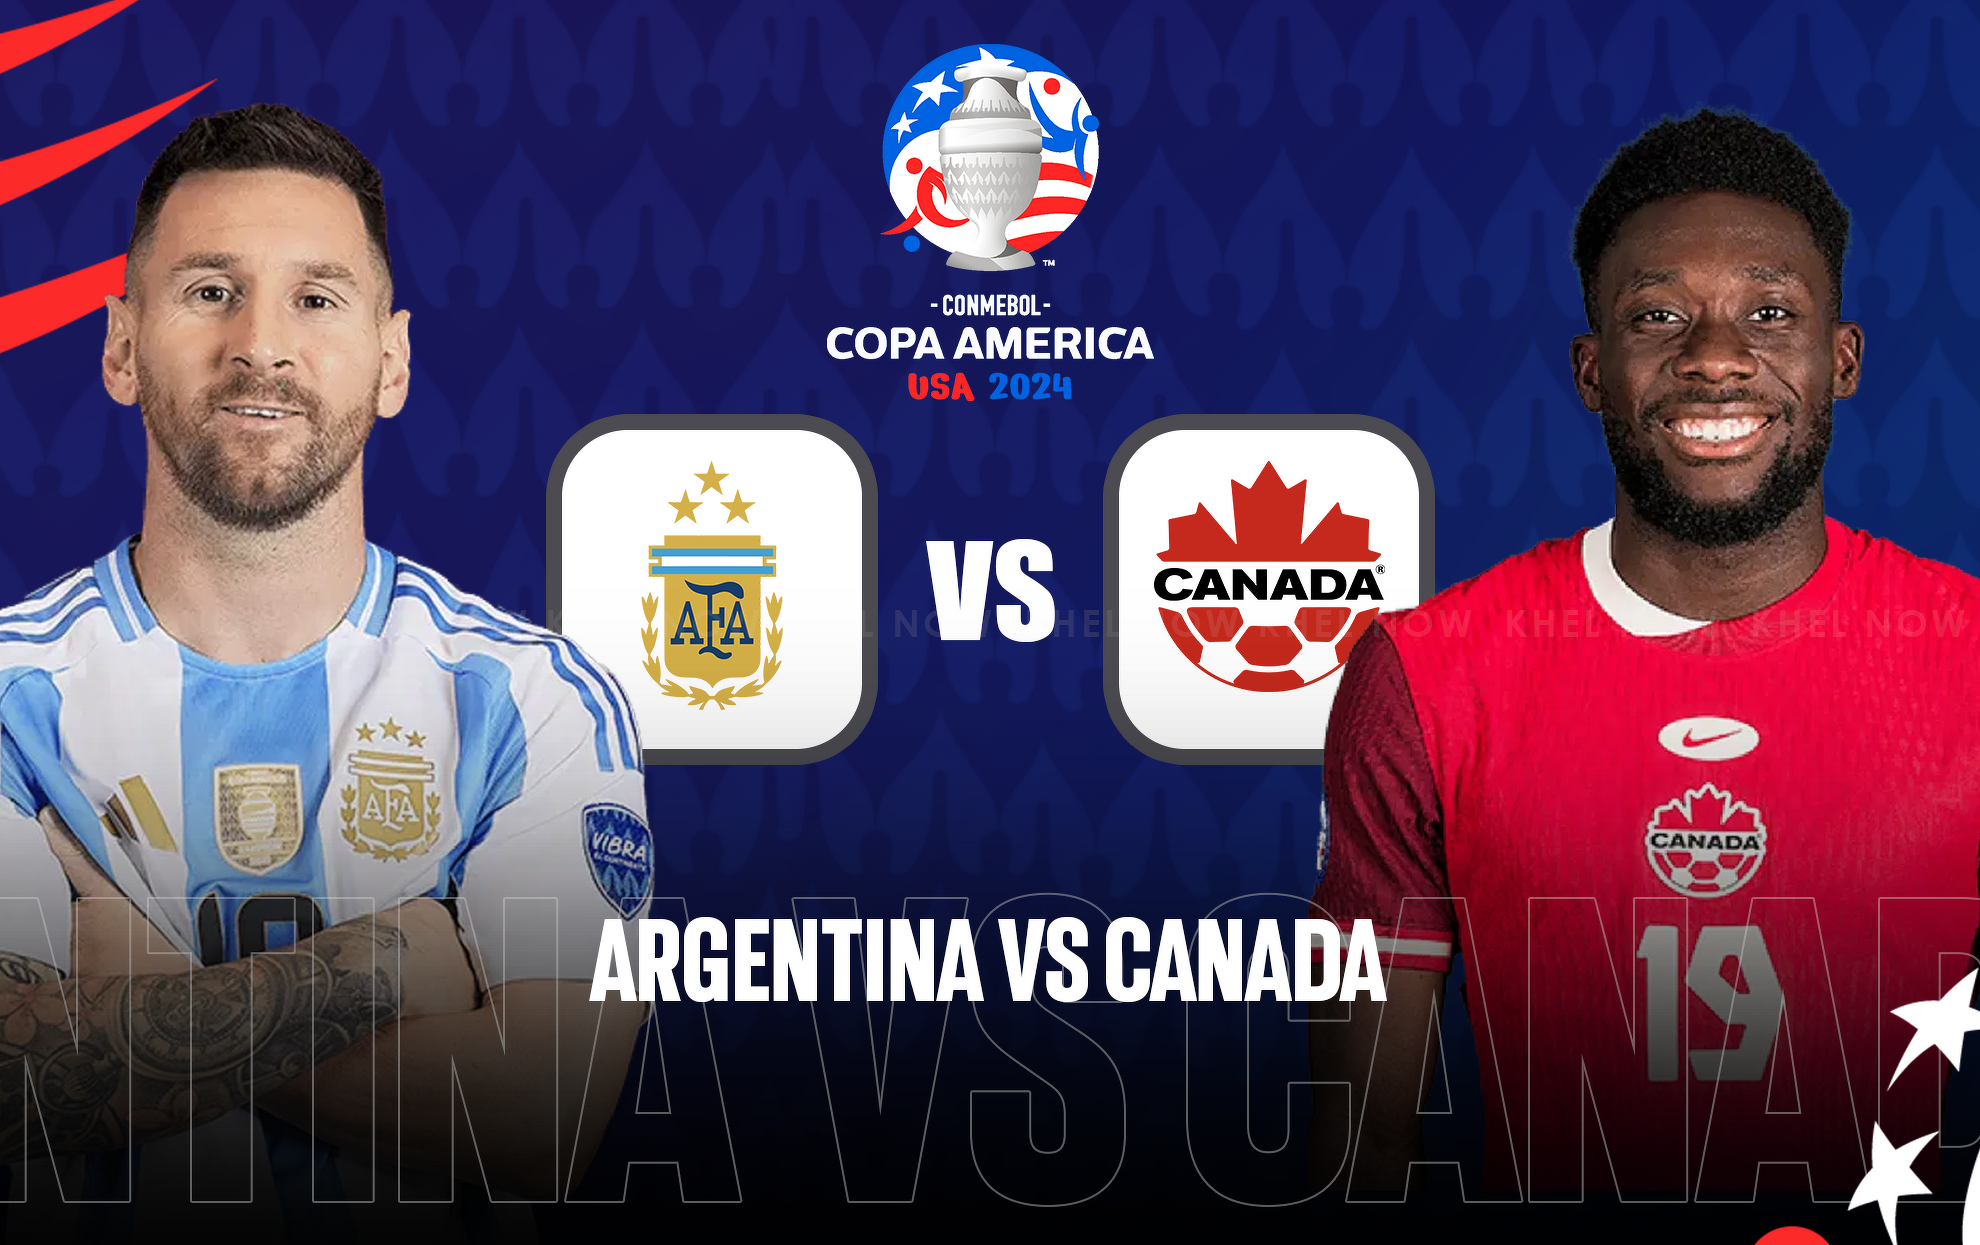 Argentina vs Canada Key numbers you should know ahead of Copa America